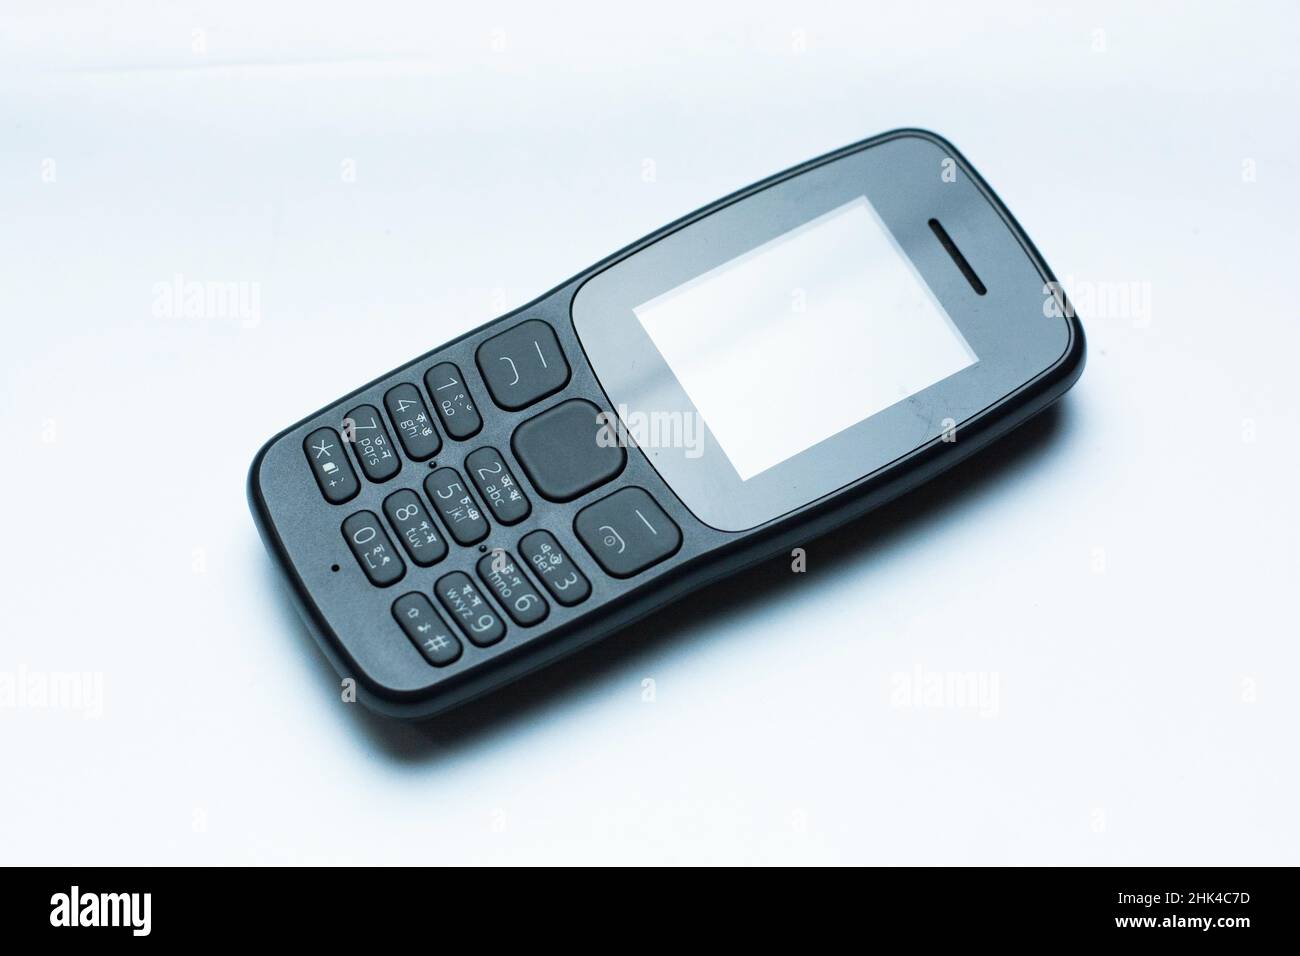 Old style feature phone,copy of Nokia button phone. Feature phone is small lightweight phone just to talk and play simple snake game Stock Photo